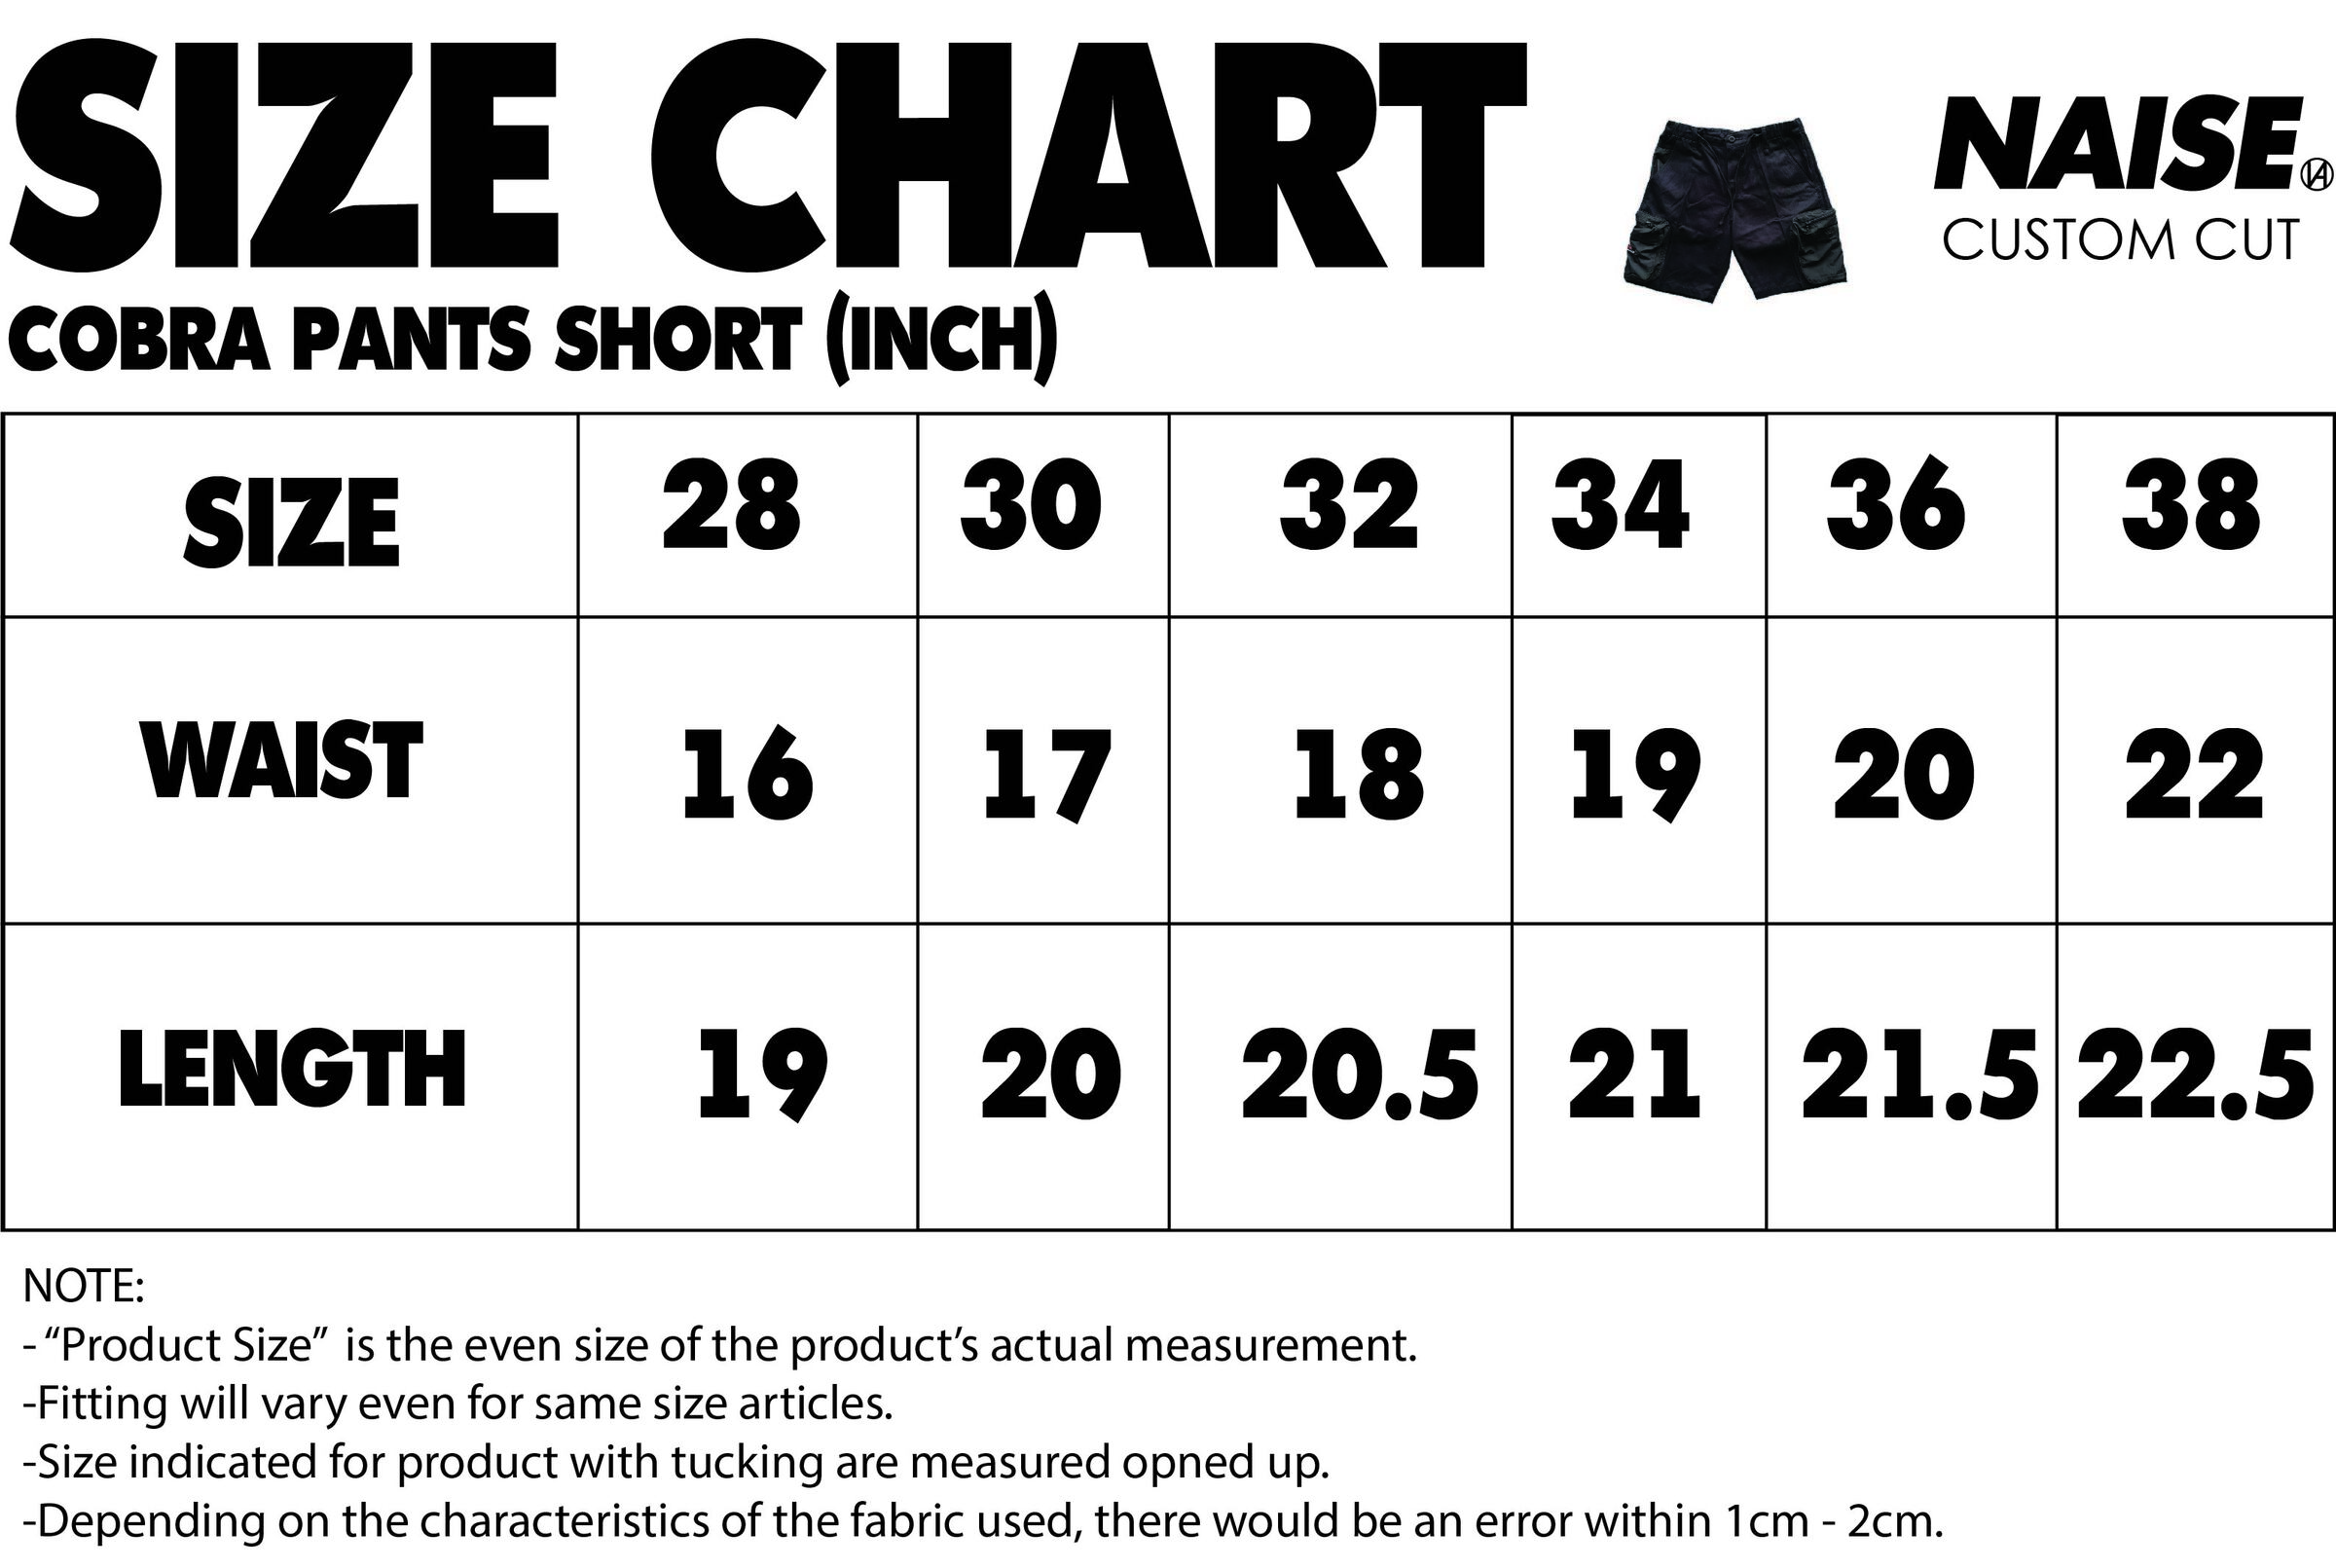 SIZE CHART COBRA SHORT PANTS 2023 MUQRIE NOTE INCLUDED